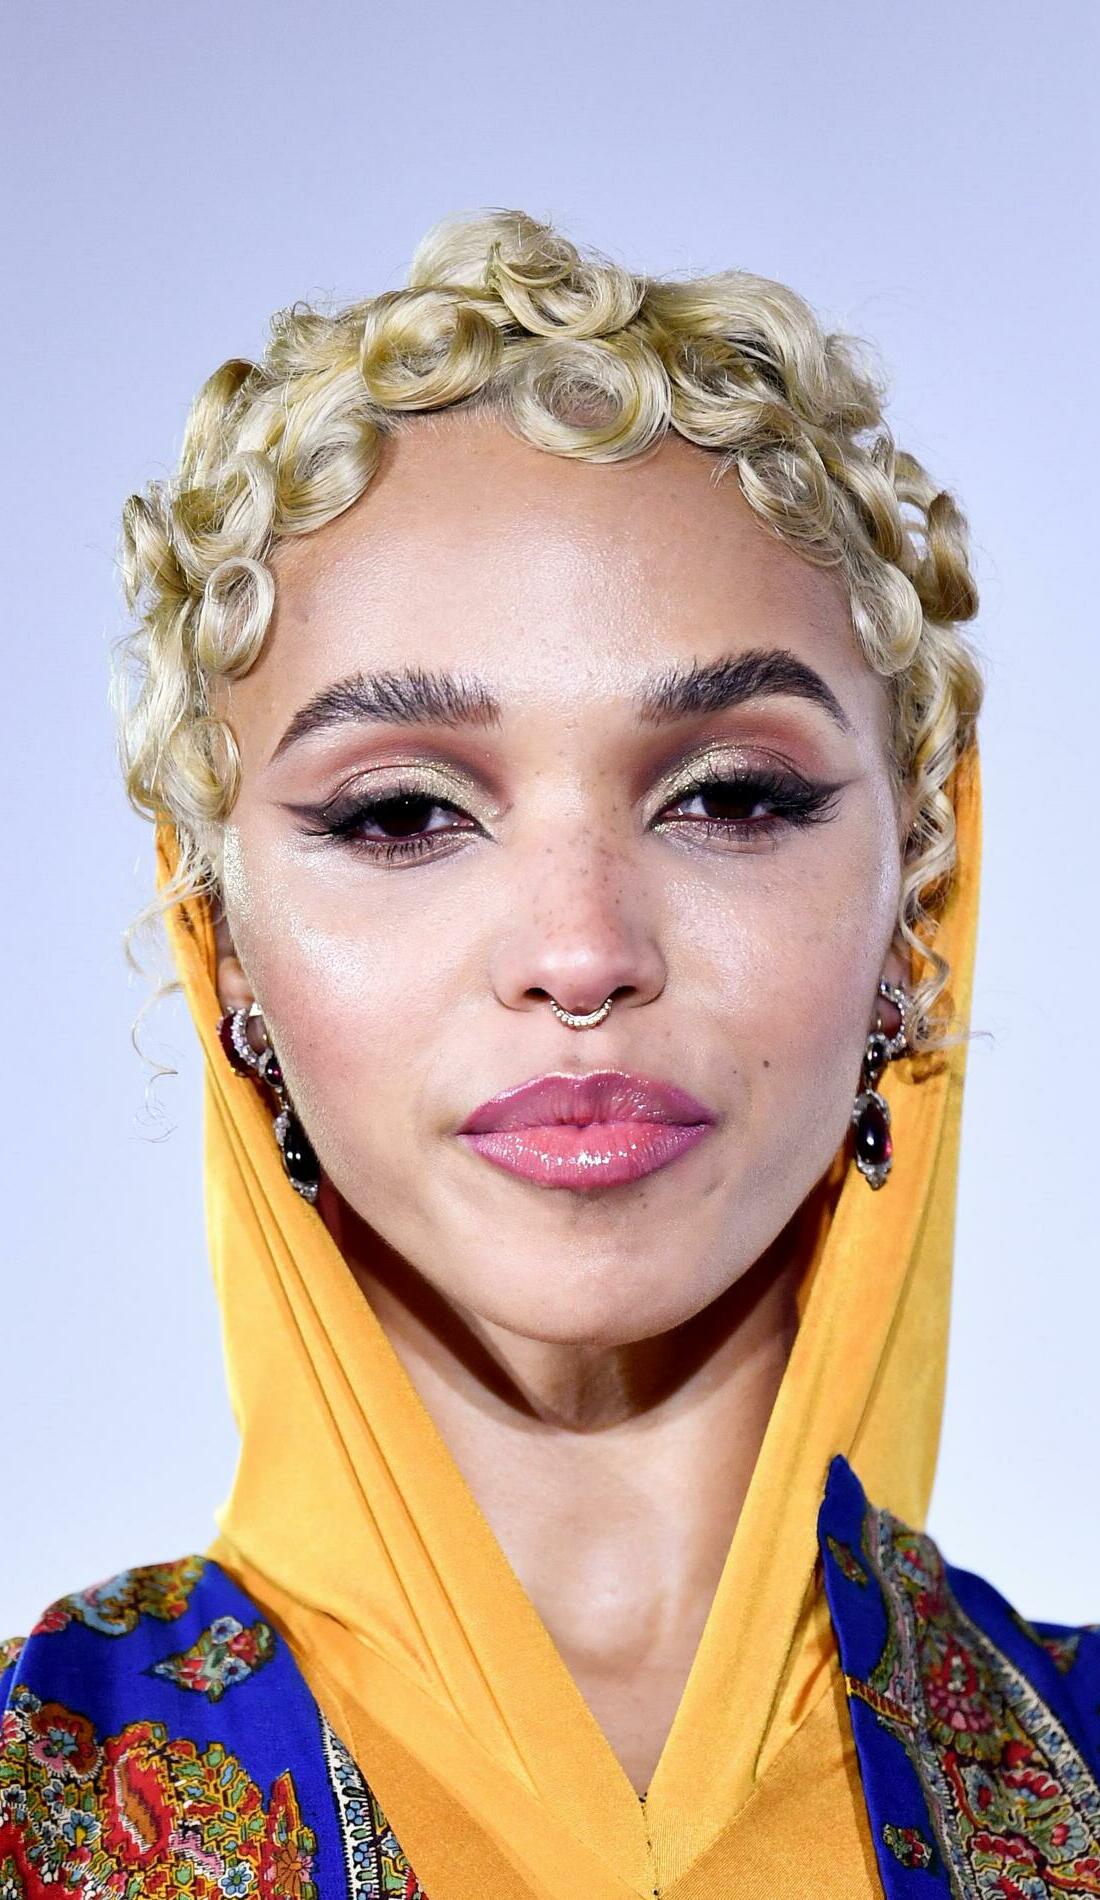 Fka Twigs Concert Tickets And Tour Dates Seatgeek